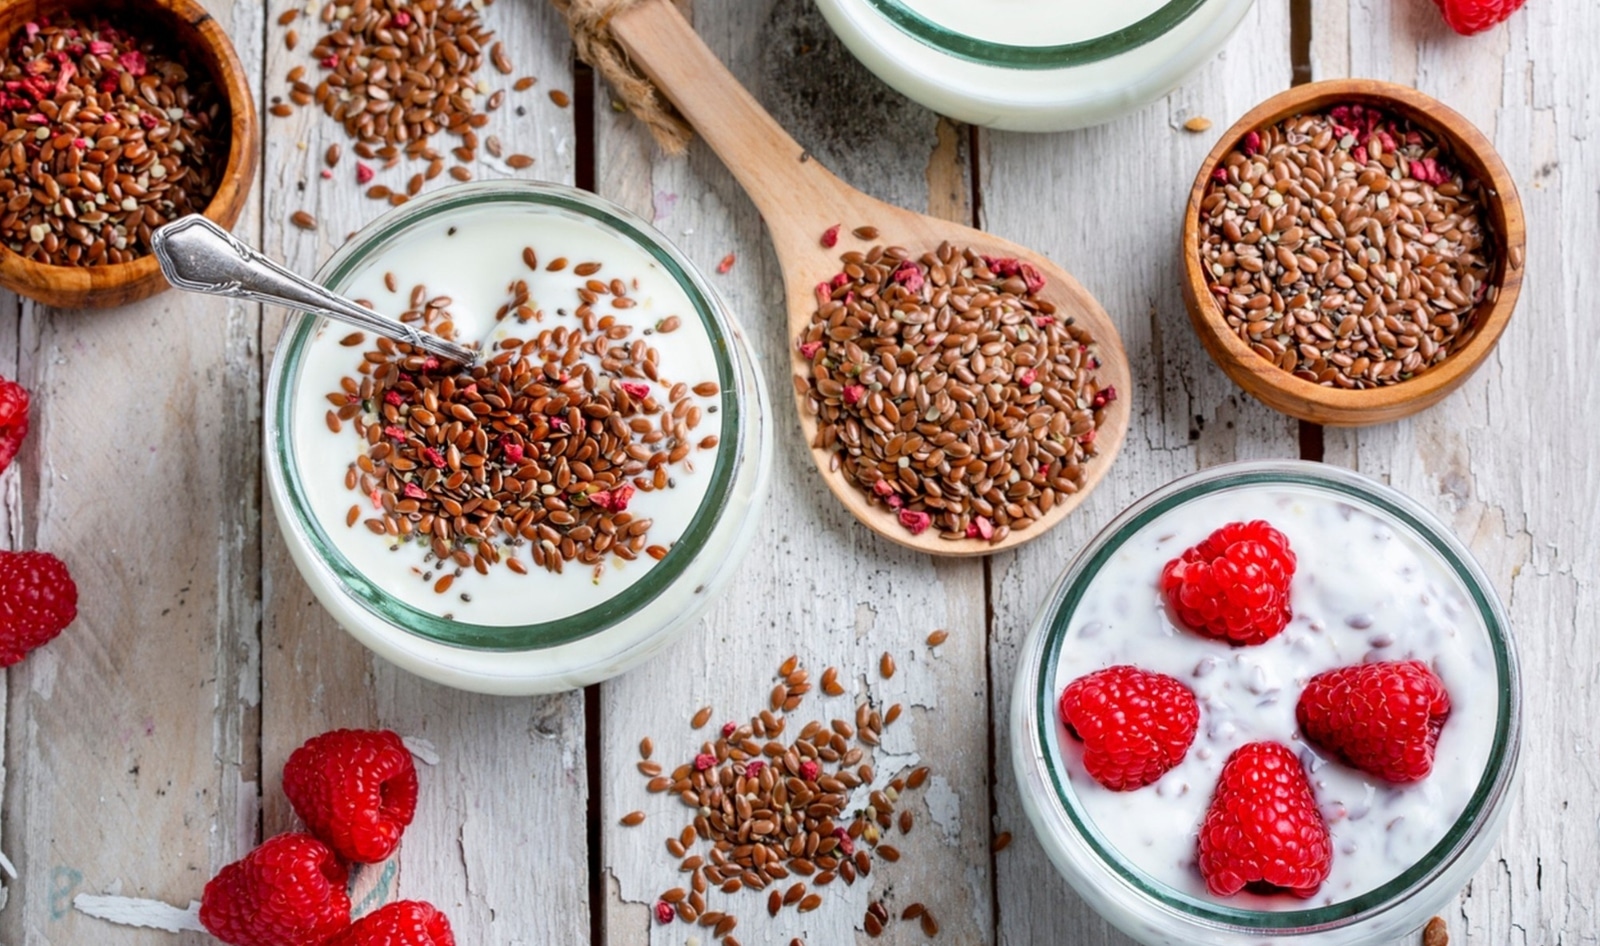 Can Flaxseed Replace Botox? A Dietitian Weighs in on the Seed's Skin Benefits